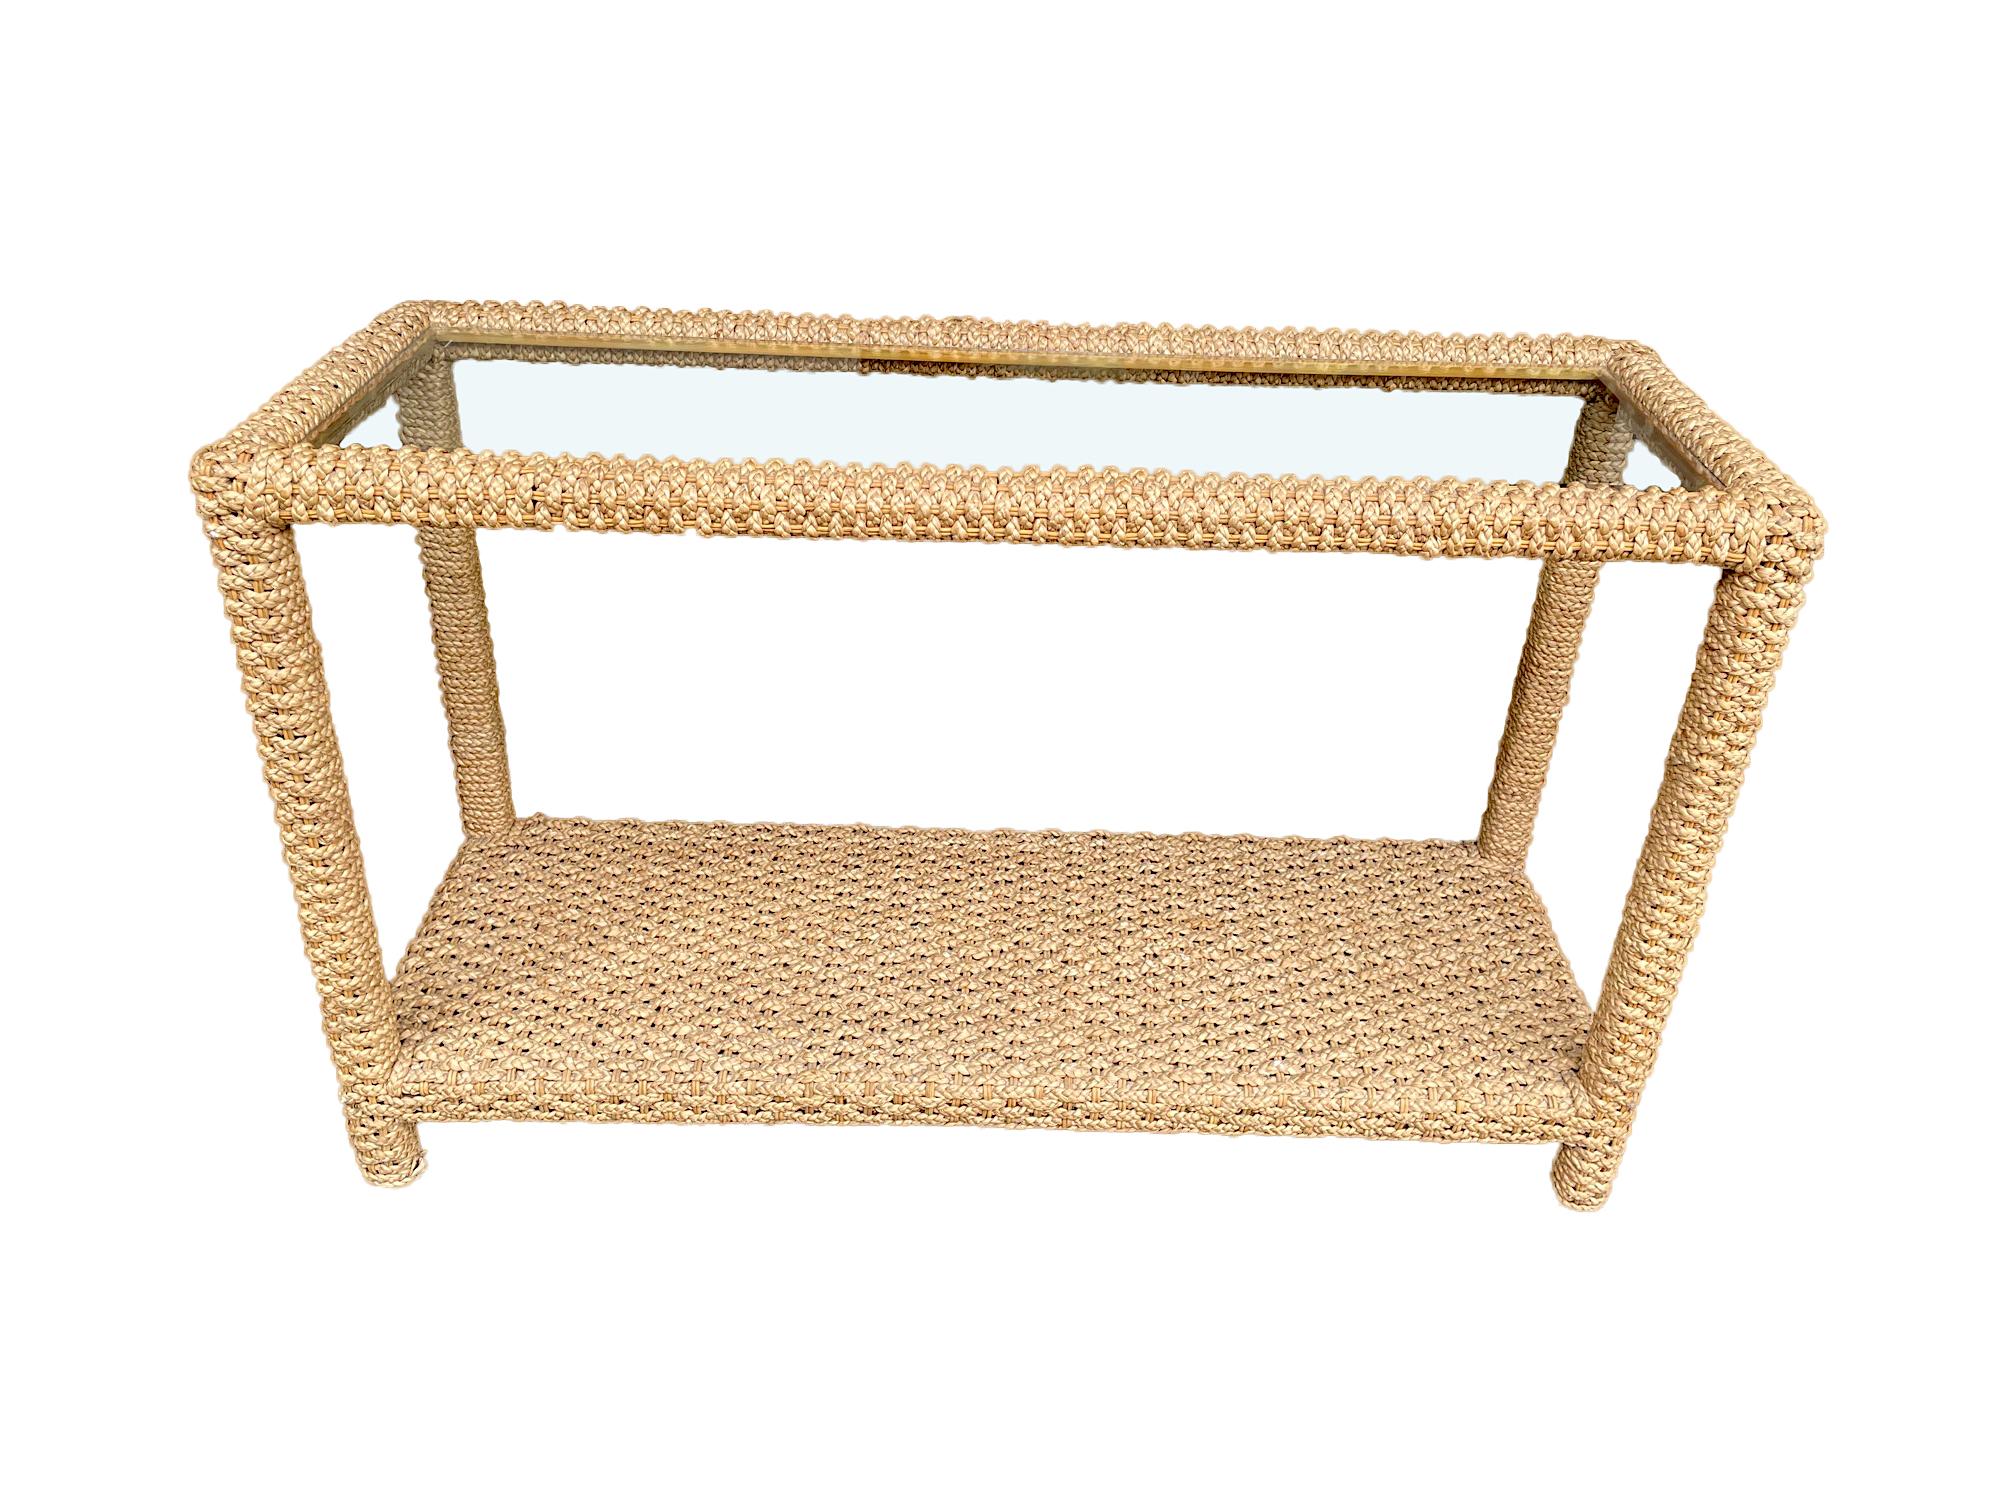 A stunning French 1950s hand woven rope console by Adrian Audoux and Frida Minet with single bevelled glass top shelf and orignal woven abaca rope and rattan frame all in perfect original condition.